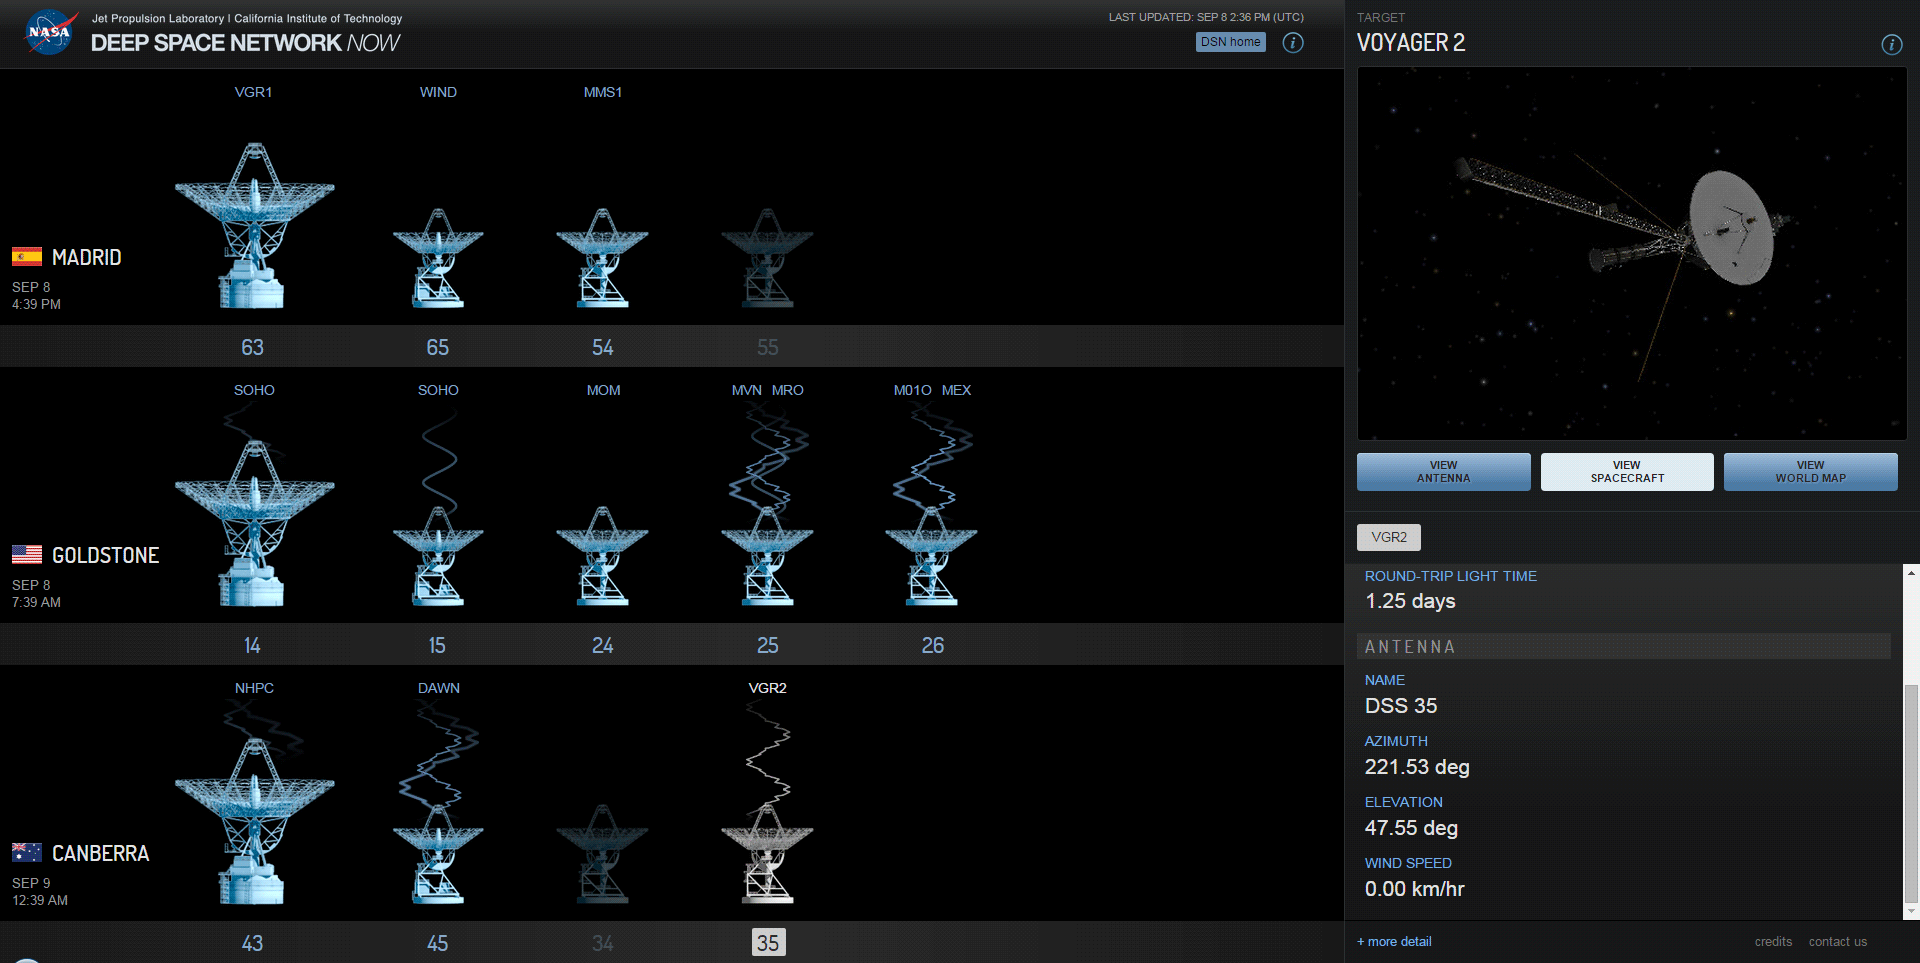 Deep Space Network - Current Status